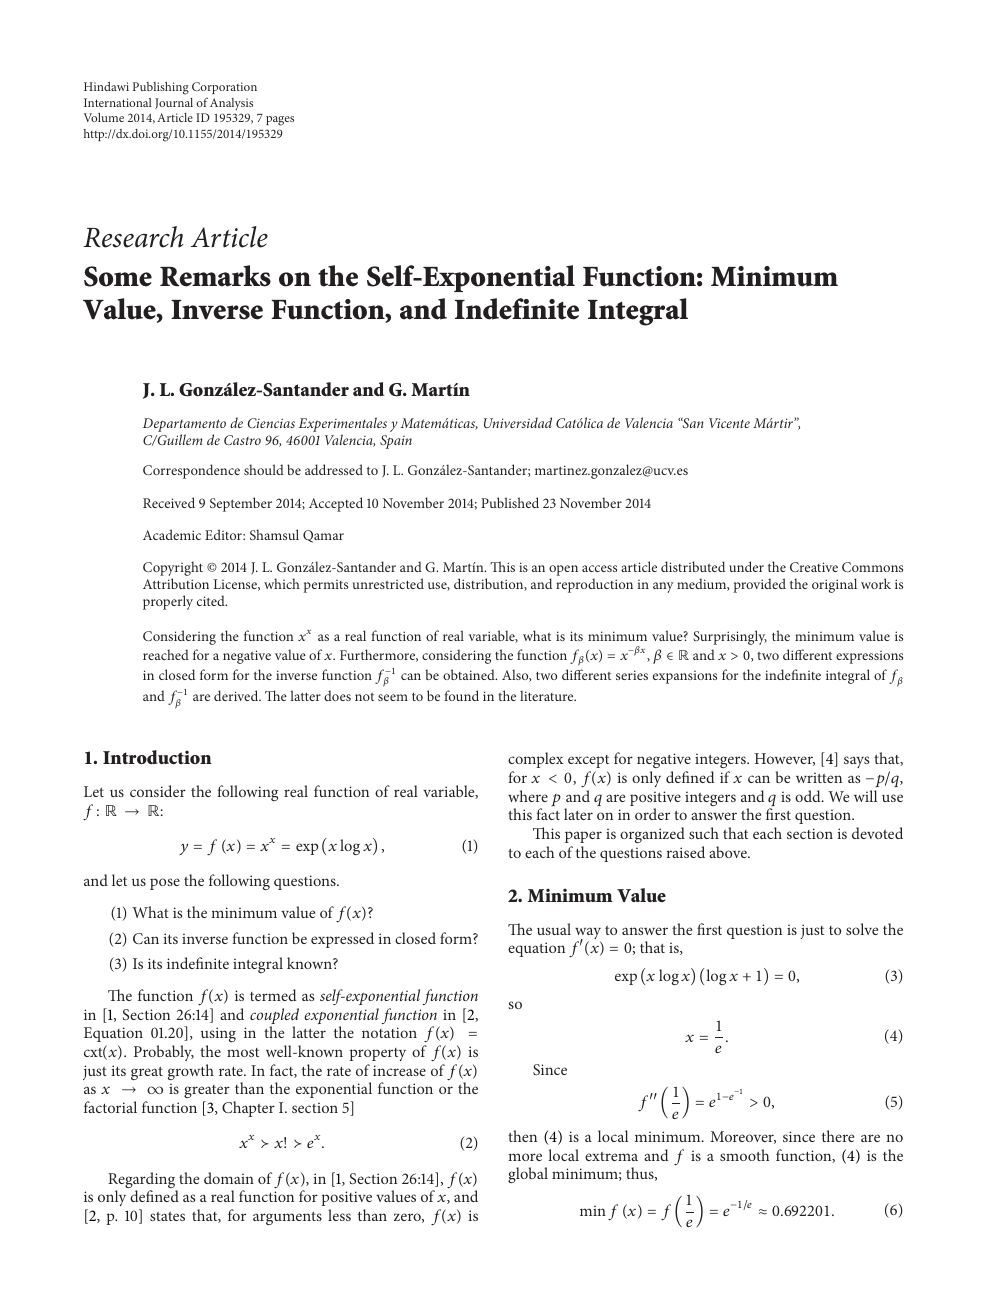 Some Remarks On The Self Exponential Function Minimum Value Inverse Function And Indefinite Integral Topic Of Research Paper In Mathematics Download Scholarly Article Pdf And Read For Free On Cyberleninka Open Science